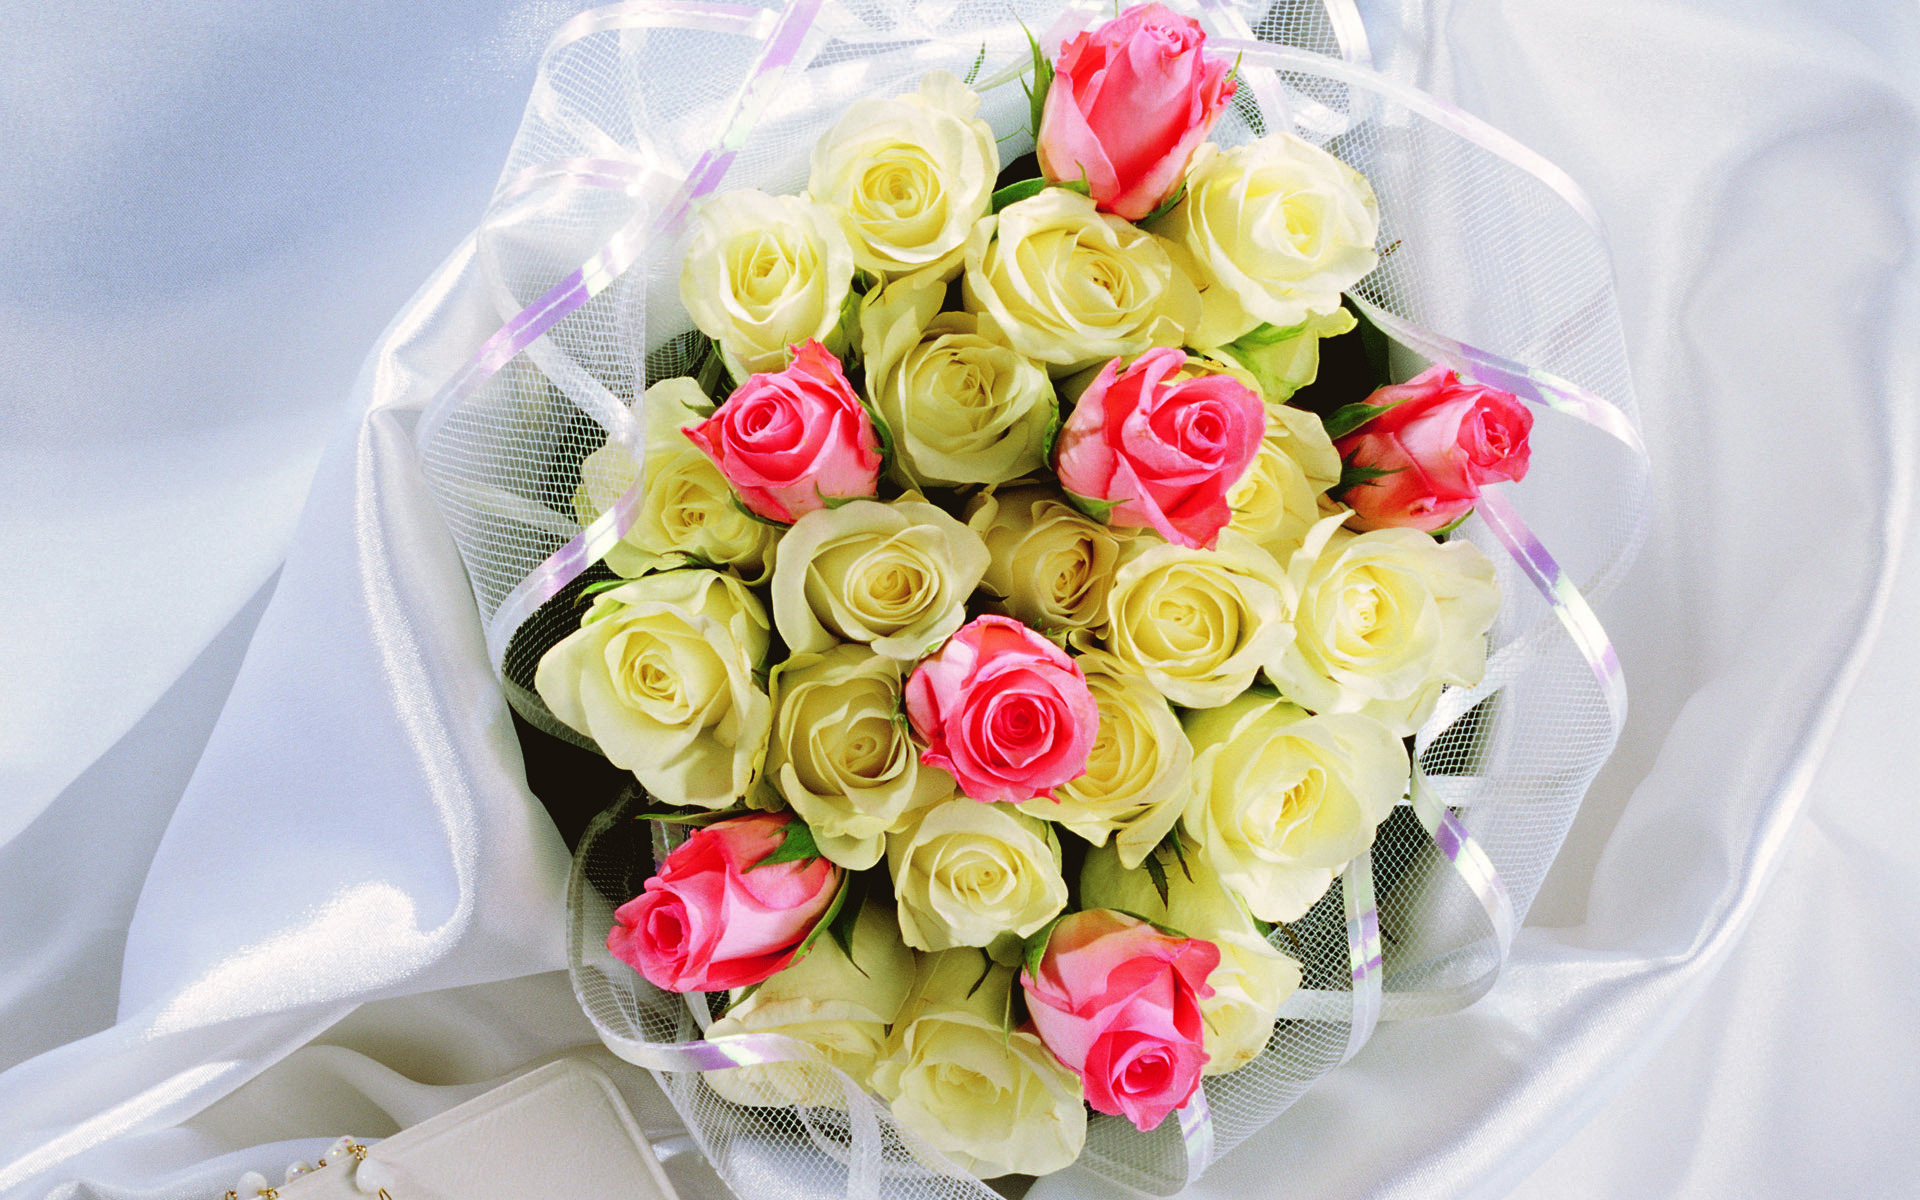 bouquet-of-roses-74207